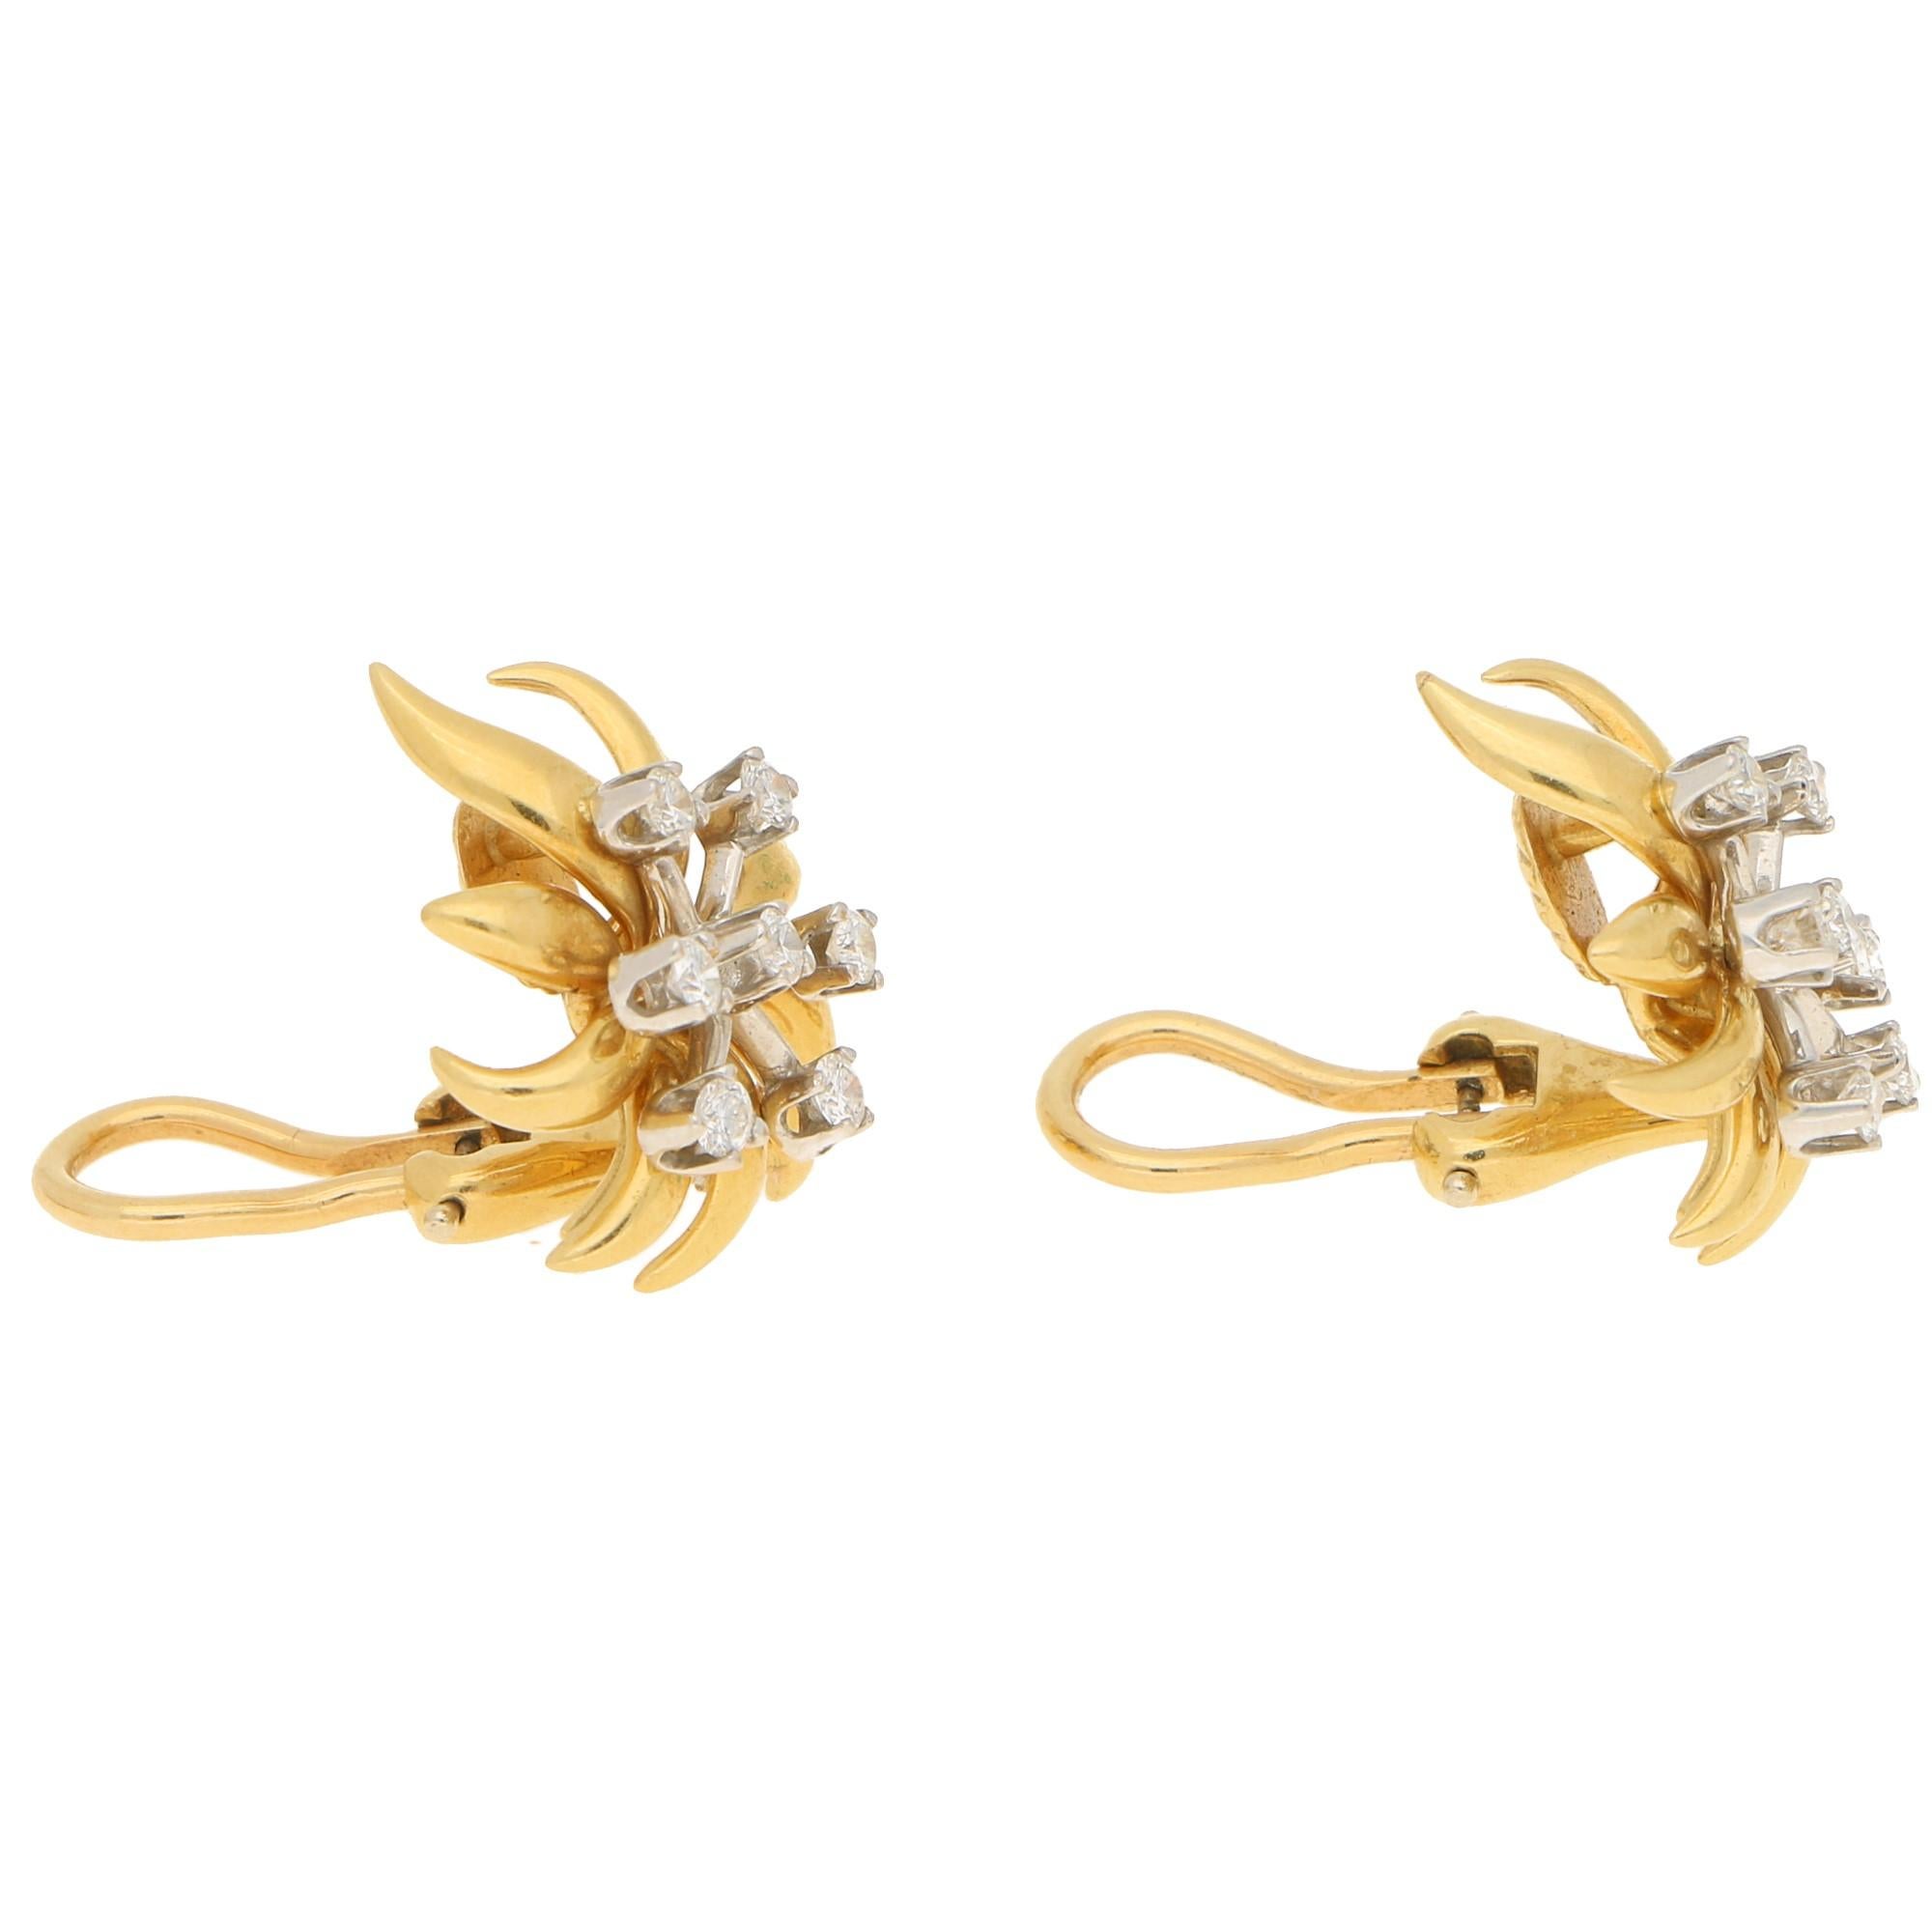 A pair of vintage Tiffany & Co. Schlumberger diamond floral earrings in 18-karat yellow gold and platinum. Each earring is designed as a smooth polished yellow gold floral motif, set with fancy round brilliant-cut diamonds stamen claw-set in